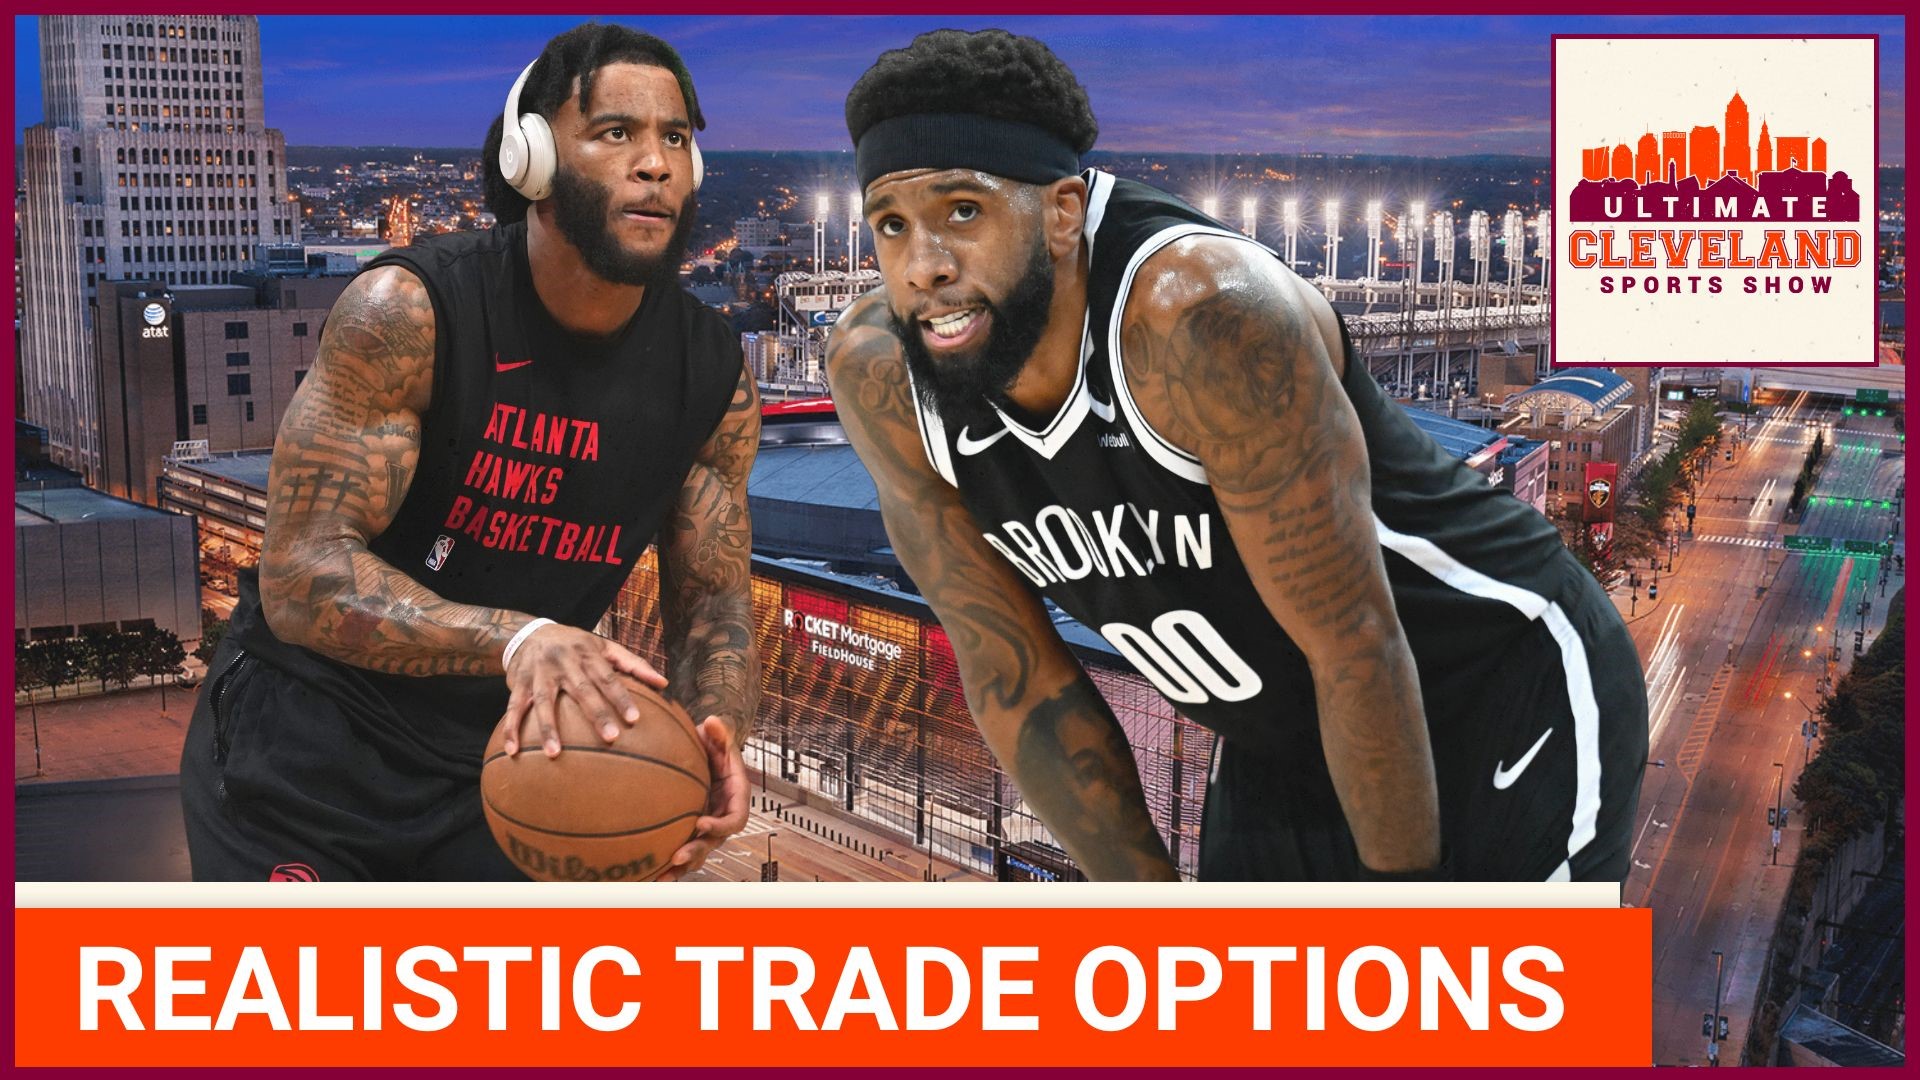 With the NBA trade deadline this Thursday, will the Cleveland Cavaliers be in the market and if so, who should they target?